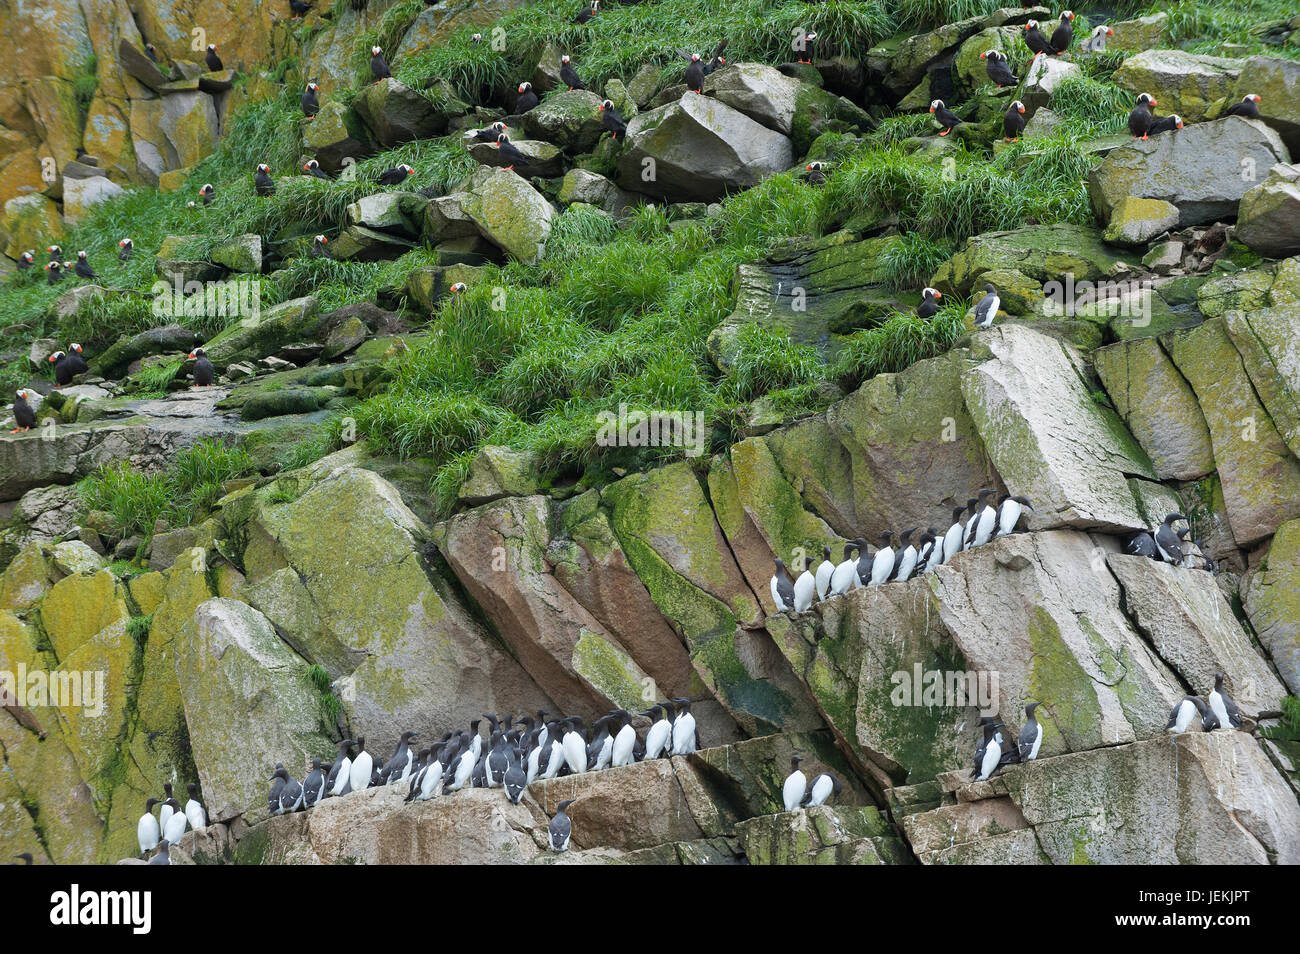 Tufted Puffins (Fratercula cirrhata) and Common murres (Uria aalge) on the cliffs of Cape Achen, Chukotka, Russia Stock Photo